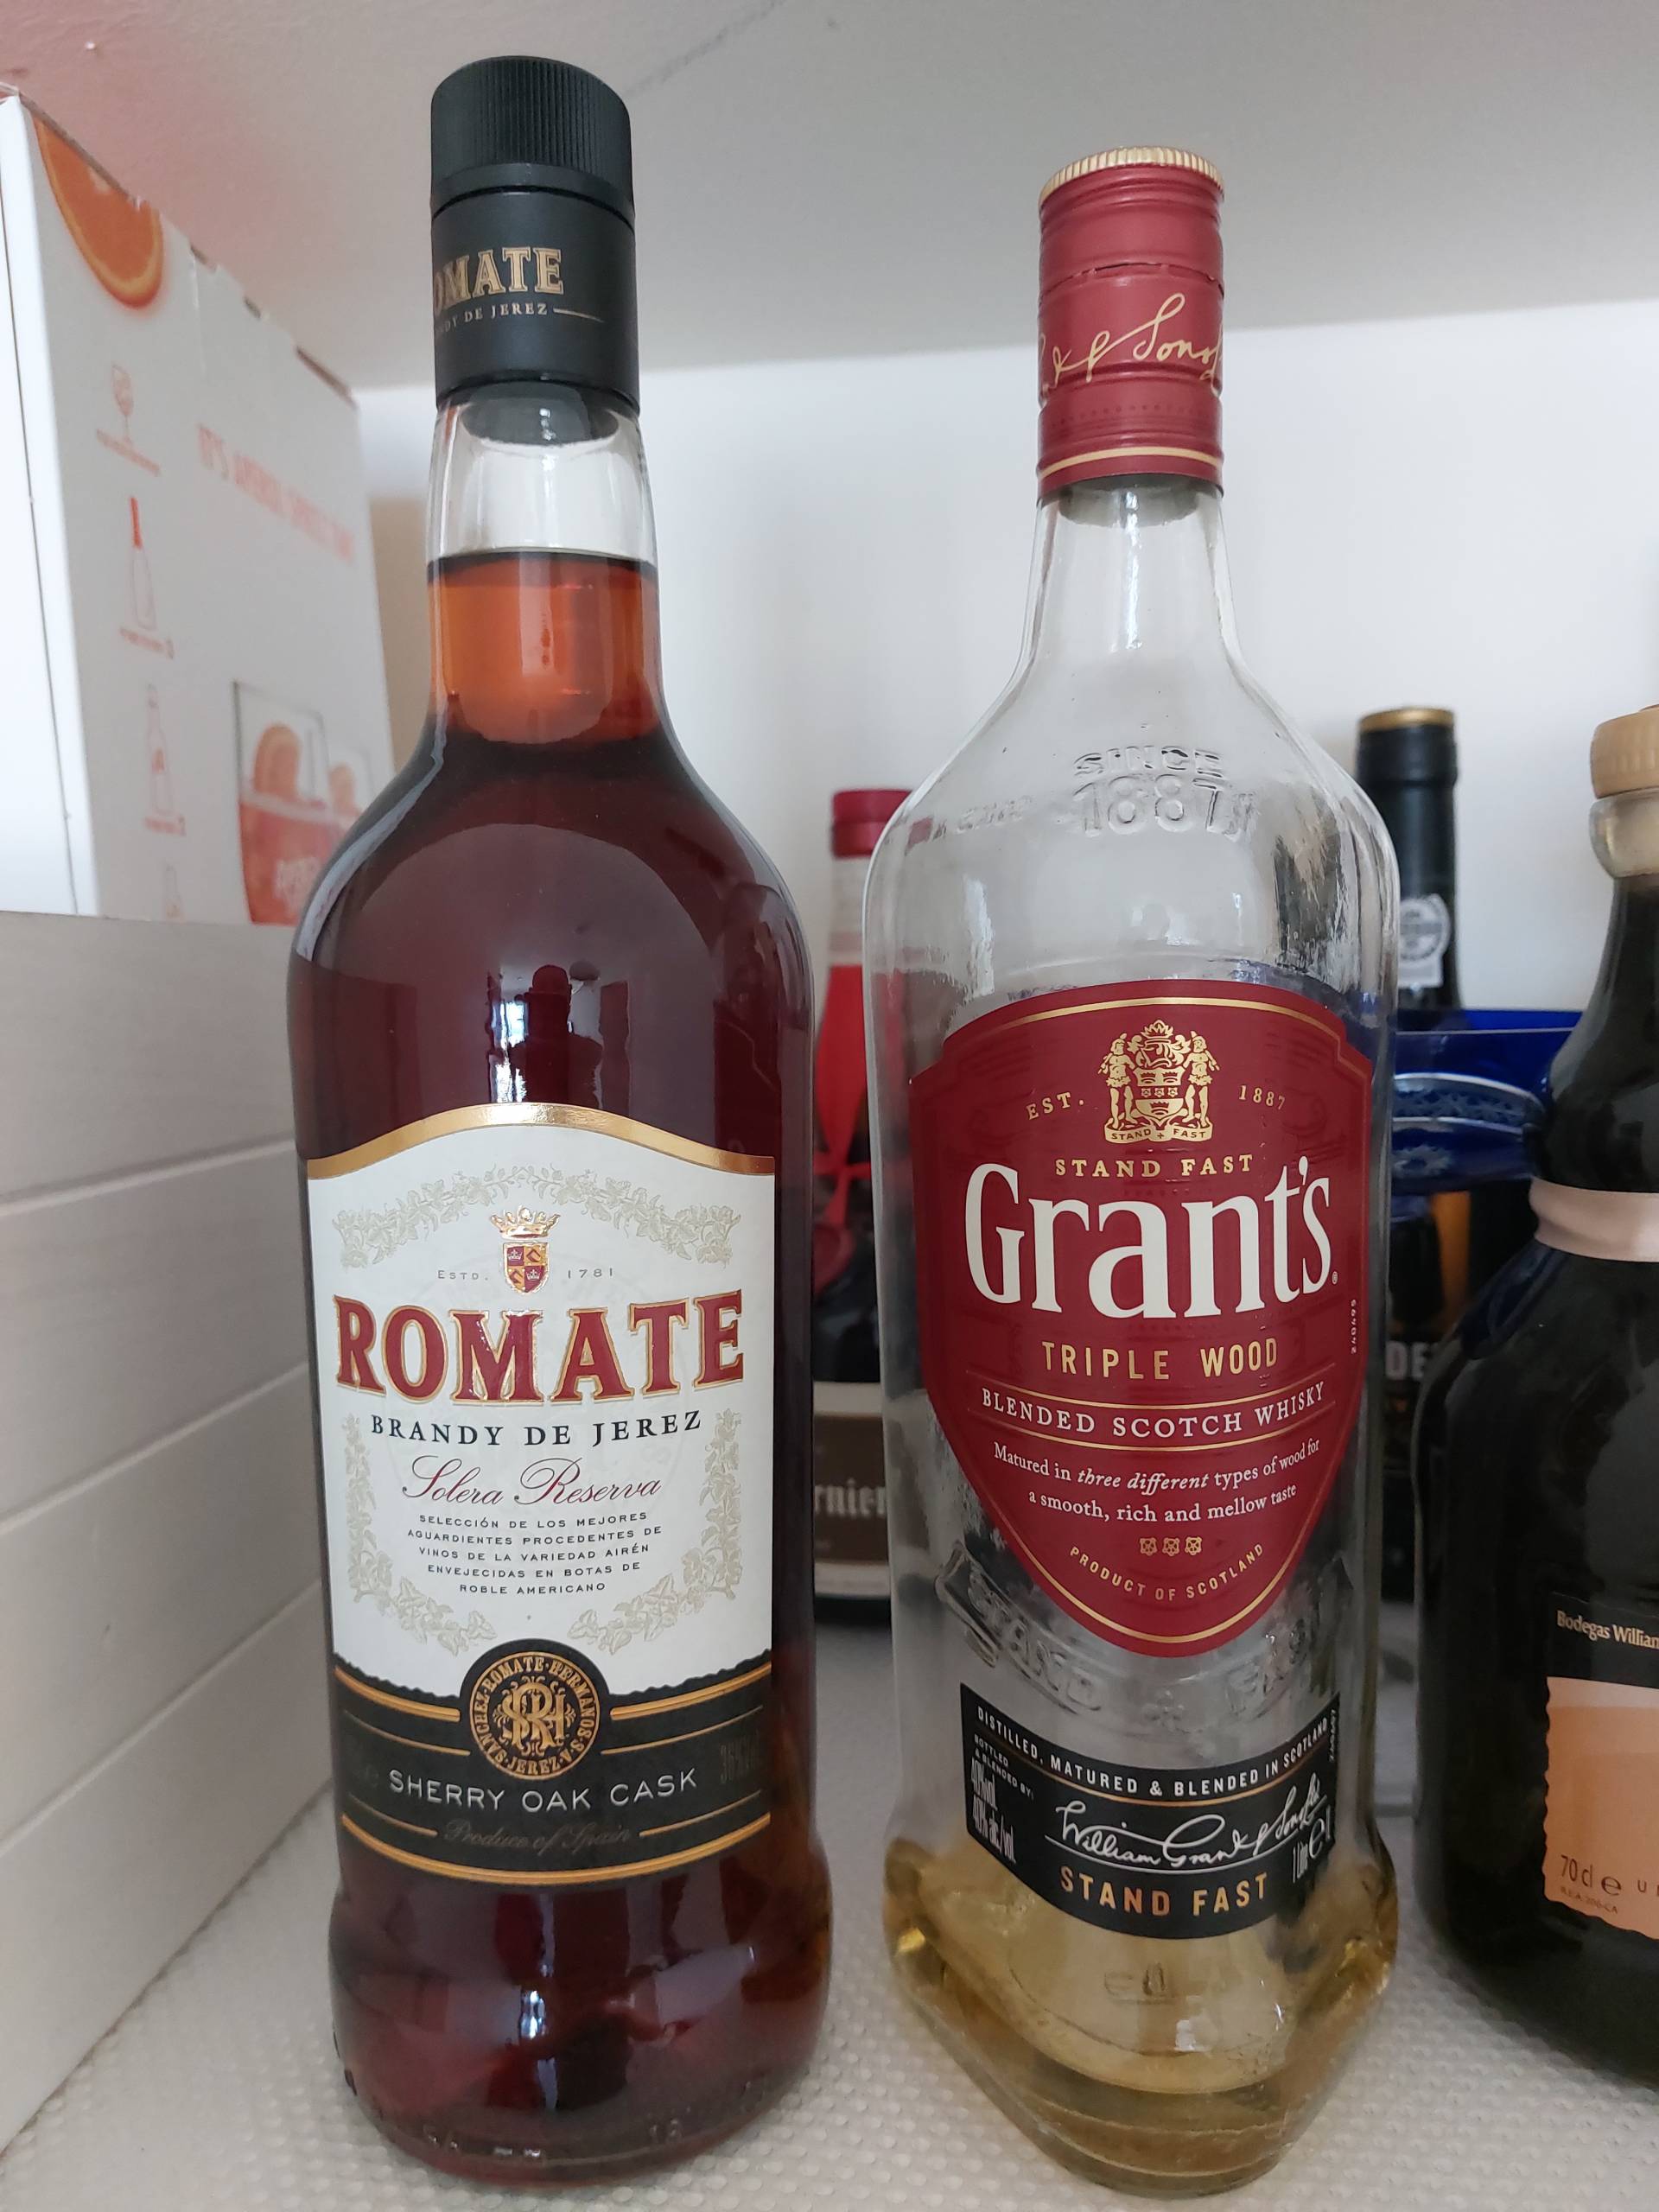 Time to Restock: Brandy or Whisky